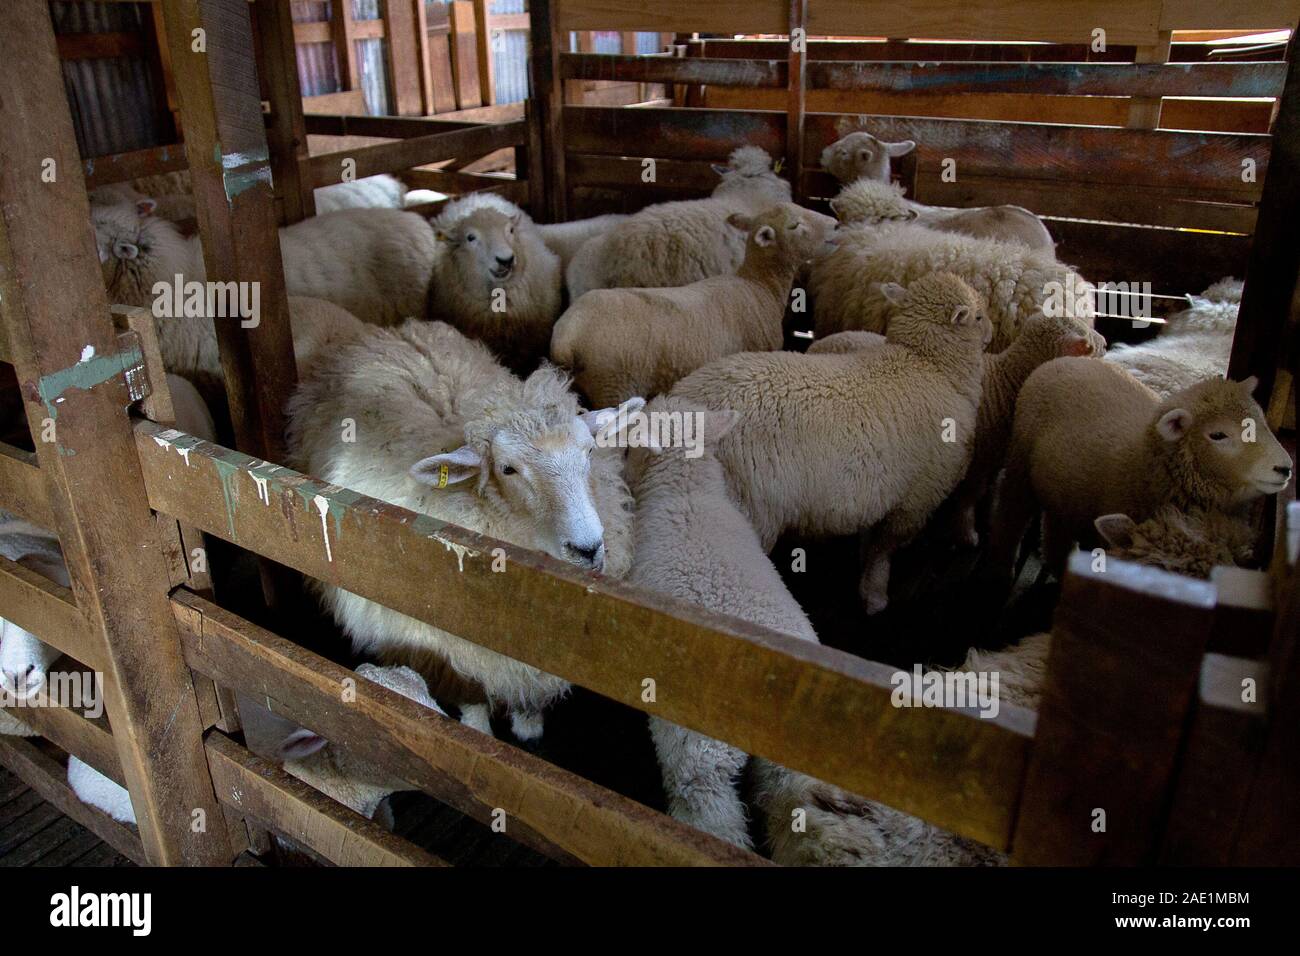 Small flock of sheep in a pen in a barn. Stock Photo